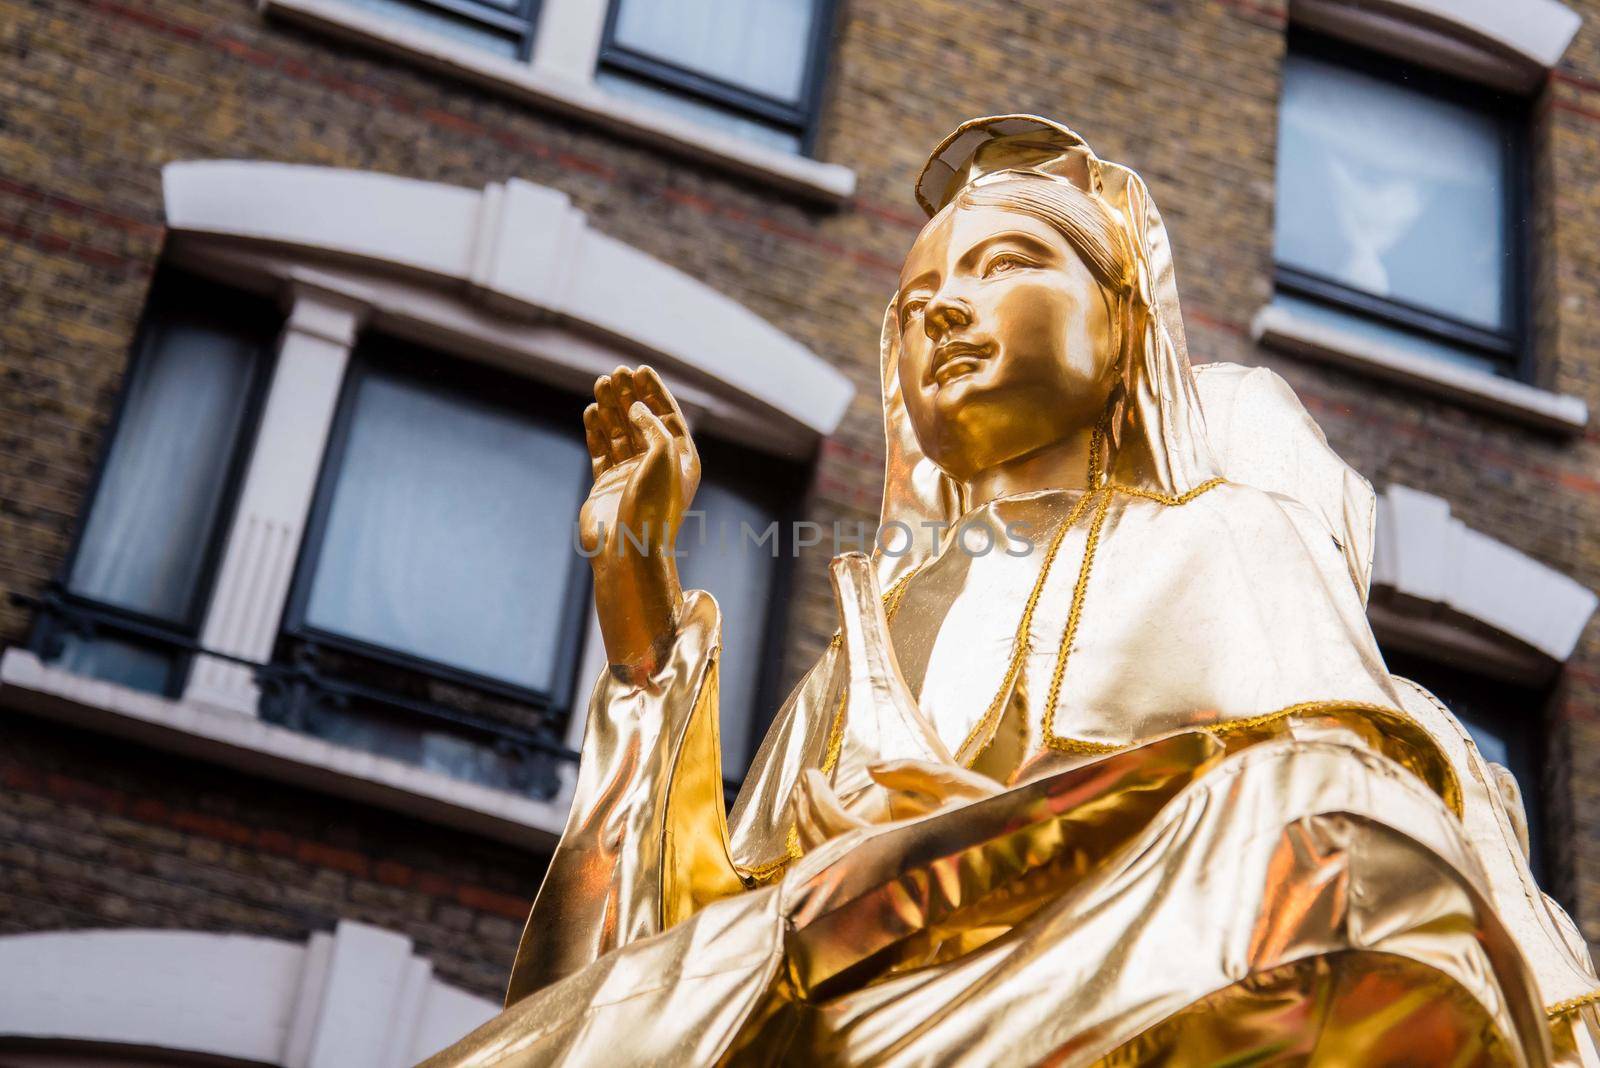 London, UK - January 29, 2017: Chinese New Year celebration parade with gold woman statue holding right hand up